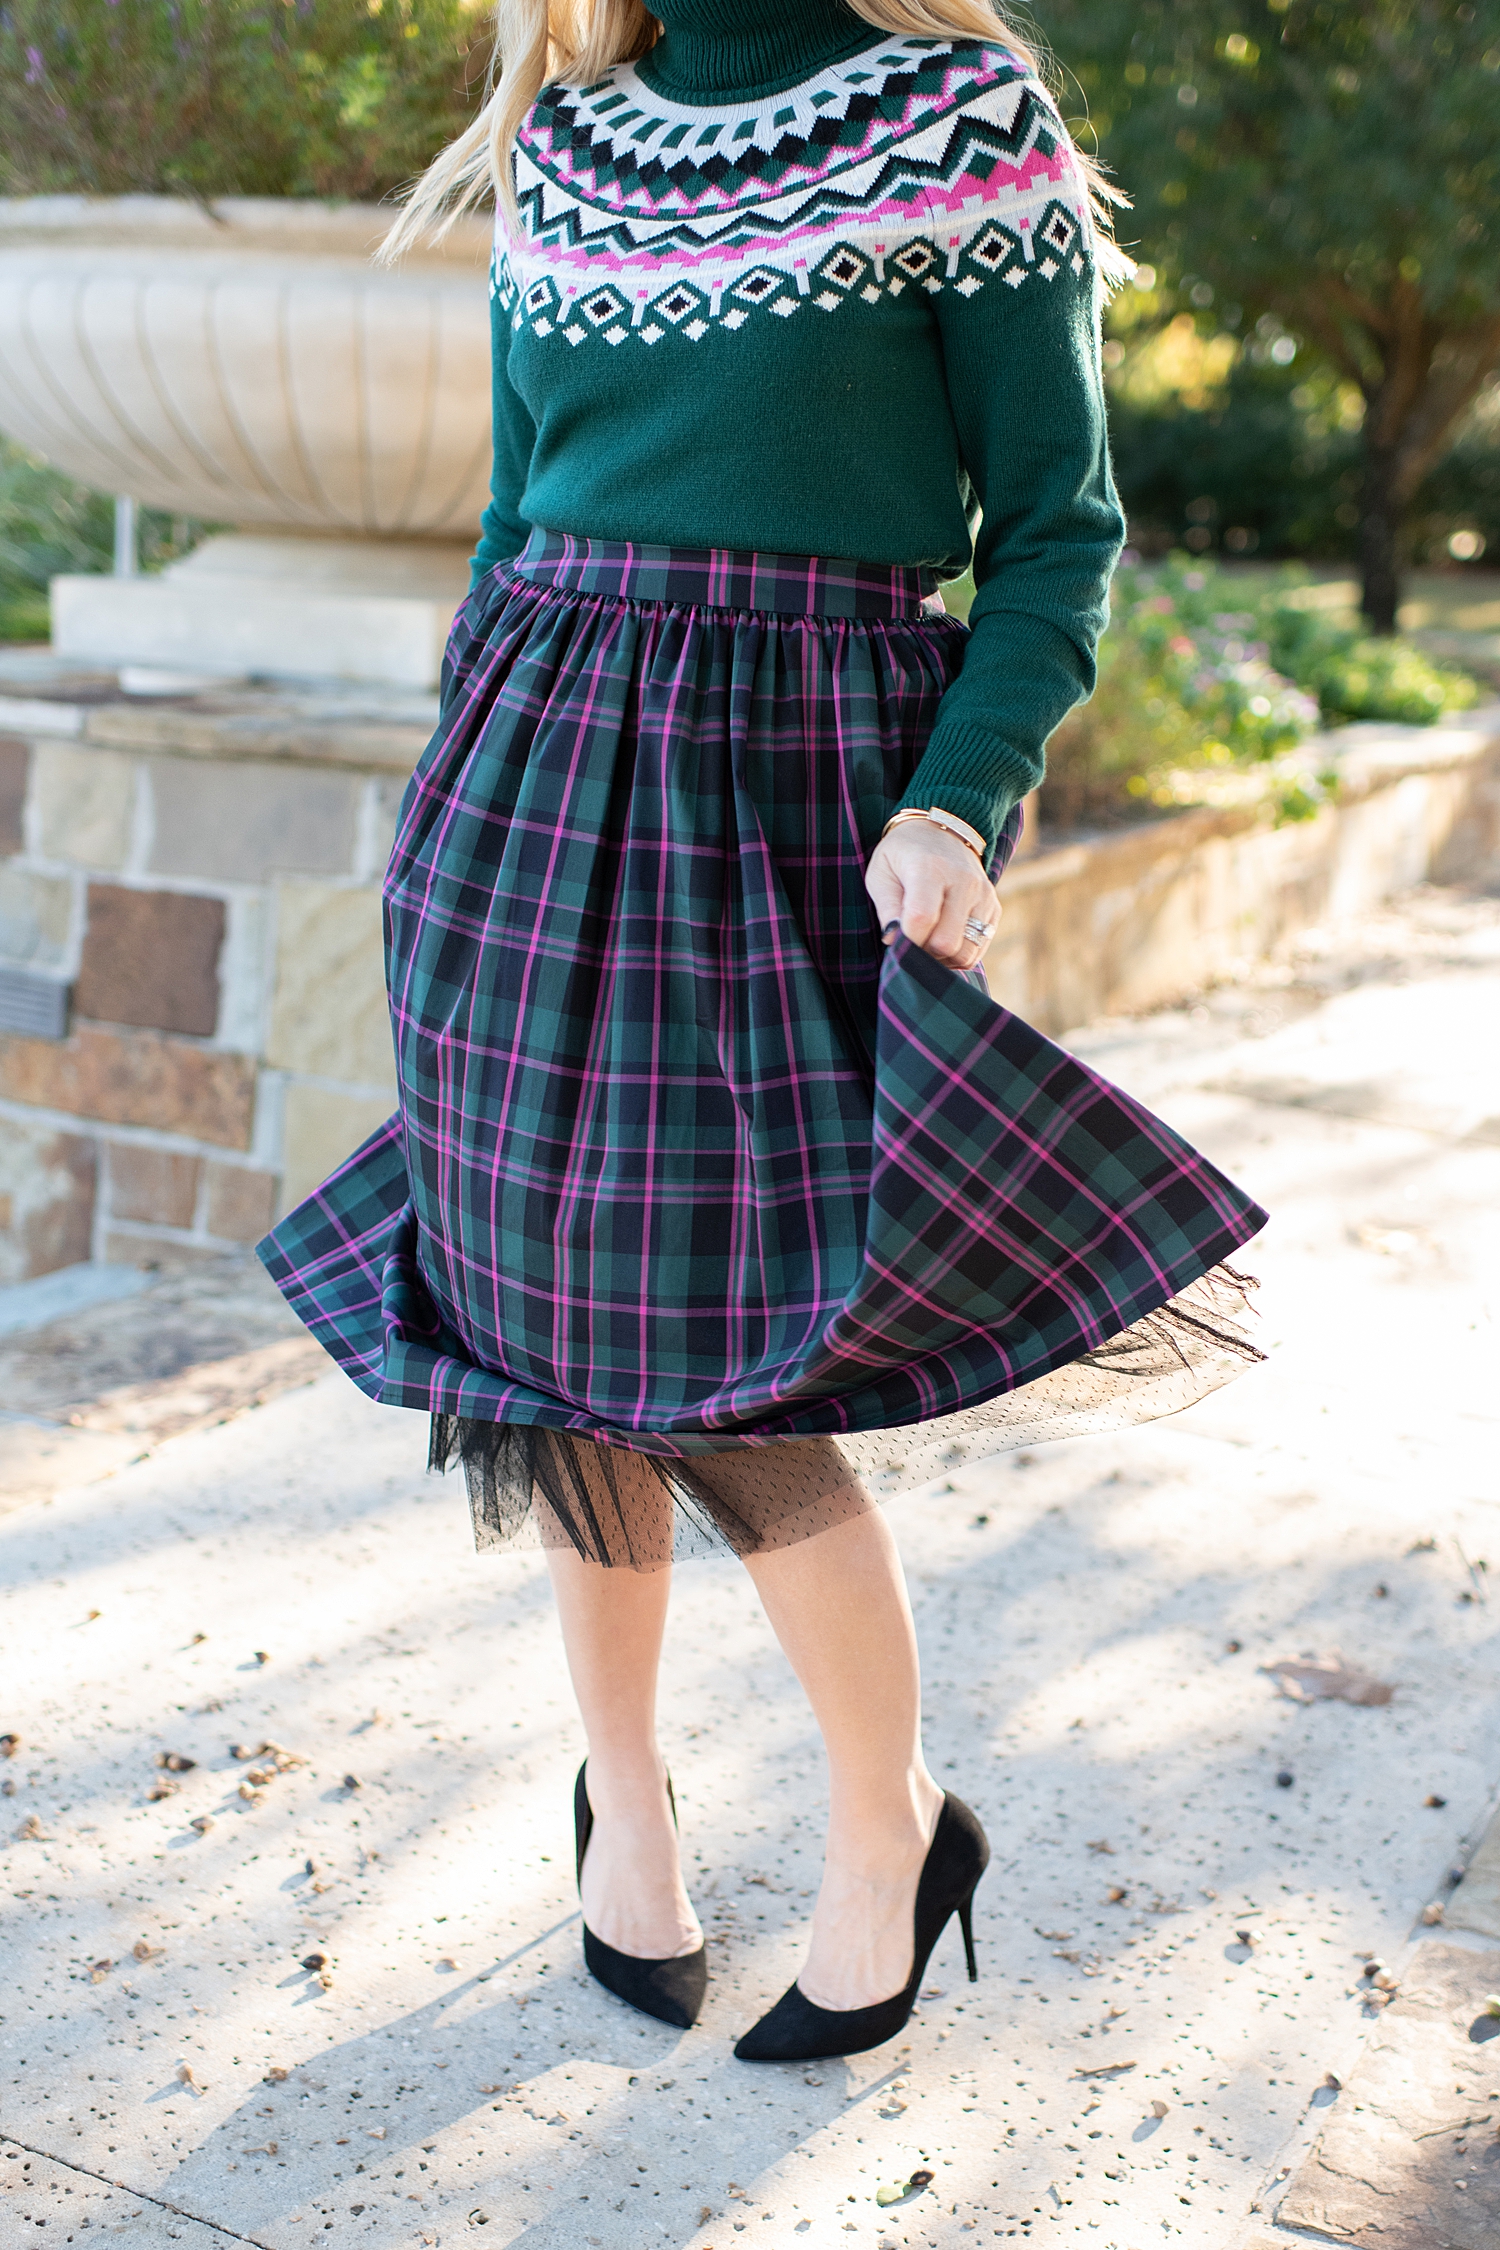 Top Houston fashion blogger, Fancy Ashley, features 7 Holiday Outfits perfect for the season: image of a woman wearing a Plaid skirt, green turtleneck sweater and Sam Edelman heels, all available at Nordstrom